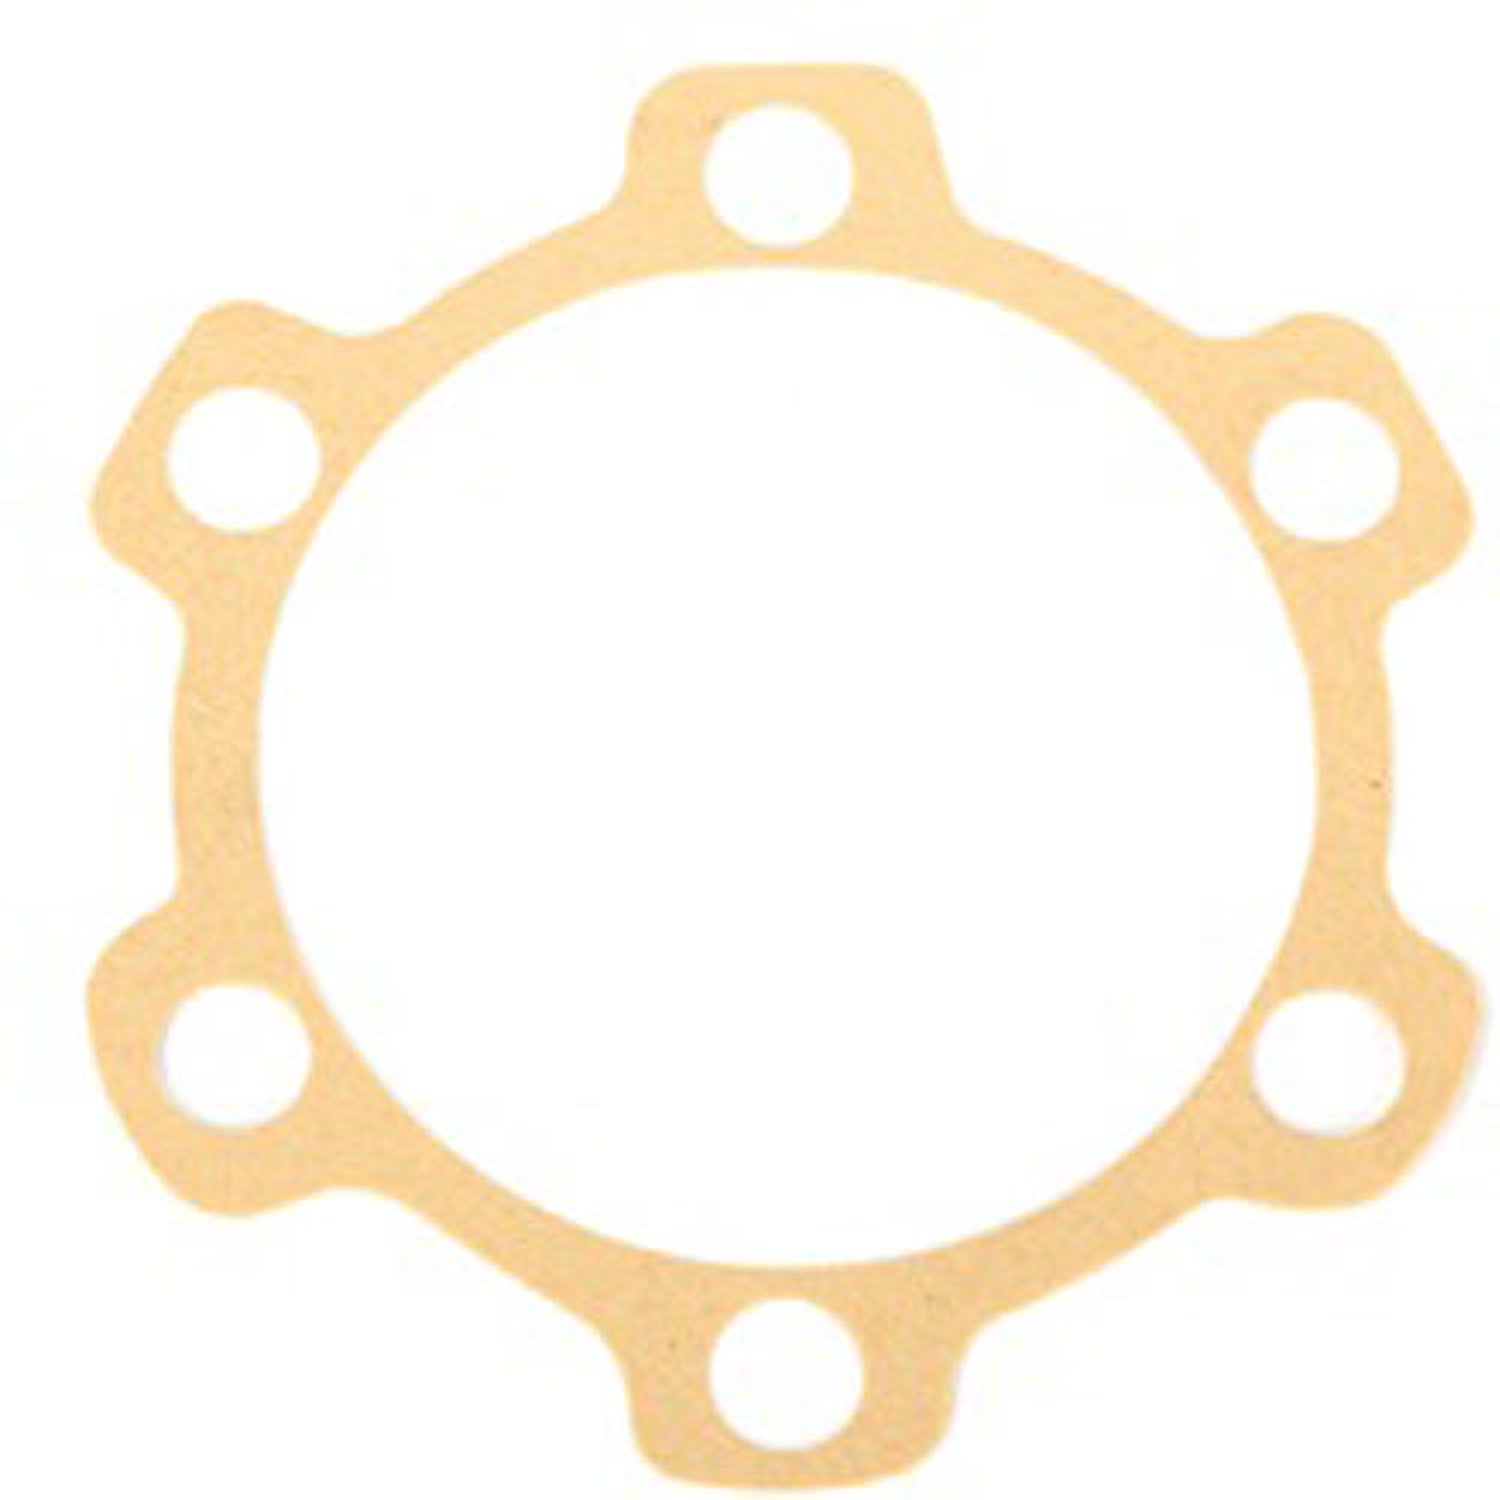 This 4 piece axle flange gasket kit from Omix-ADA fits Dana 25 and Dana 27 axles that have 6-bolt hubs.